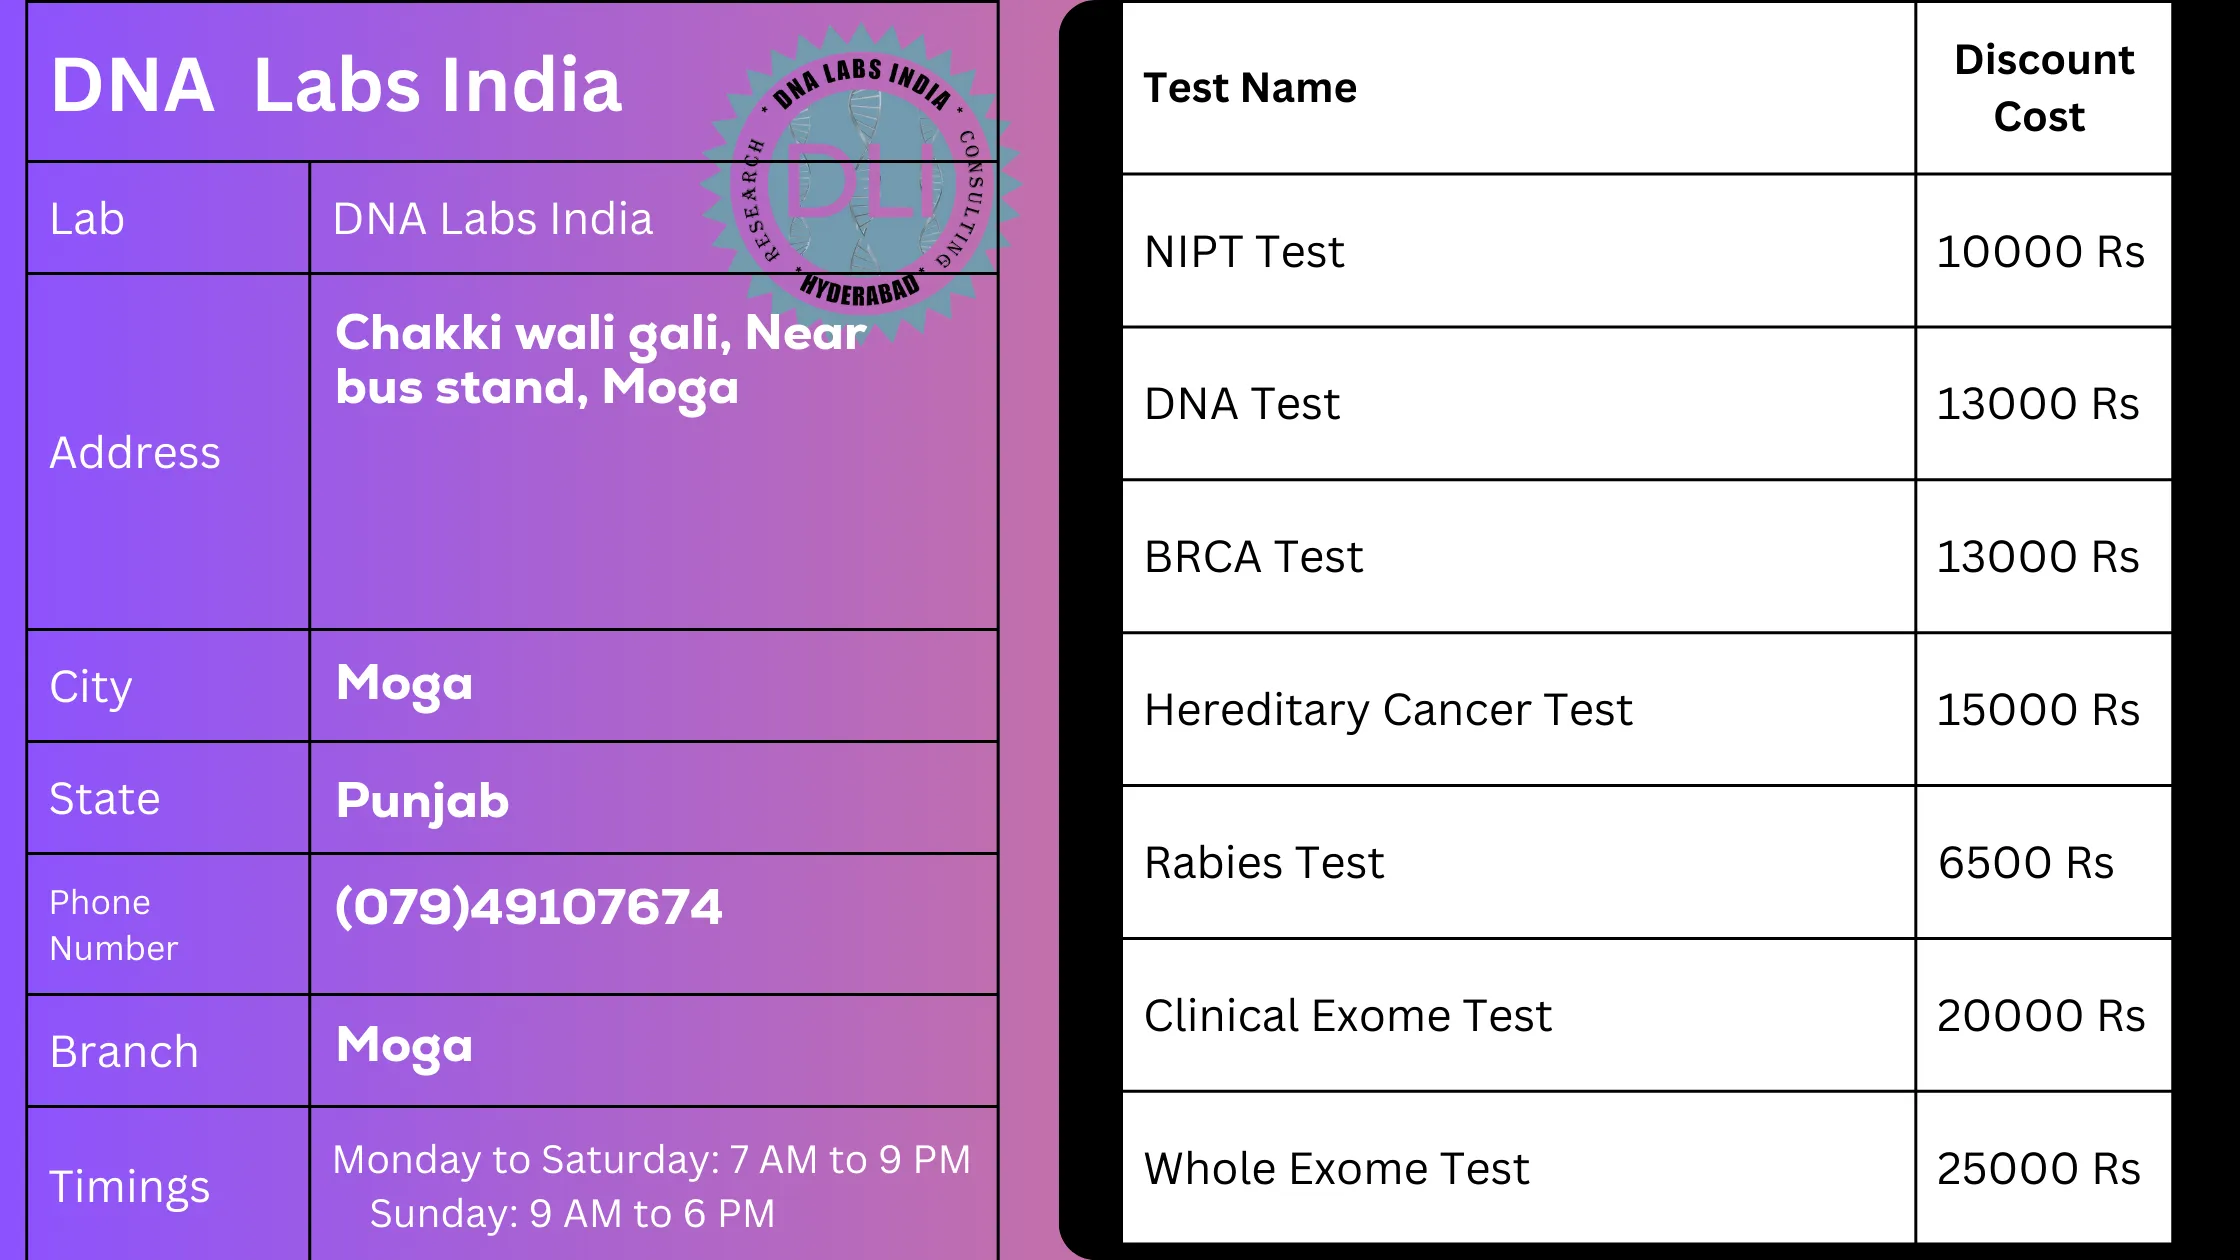 DNA Labs India - Moga: Your Trusted Partner for Genetic Testing